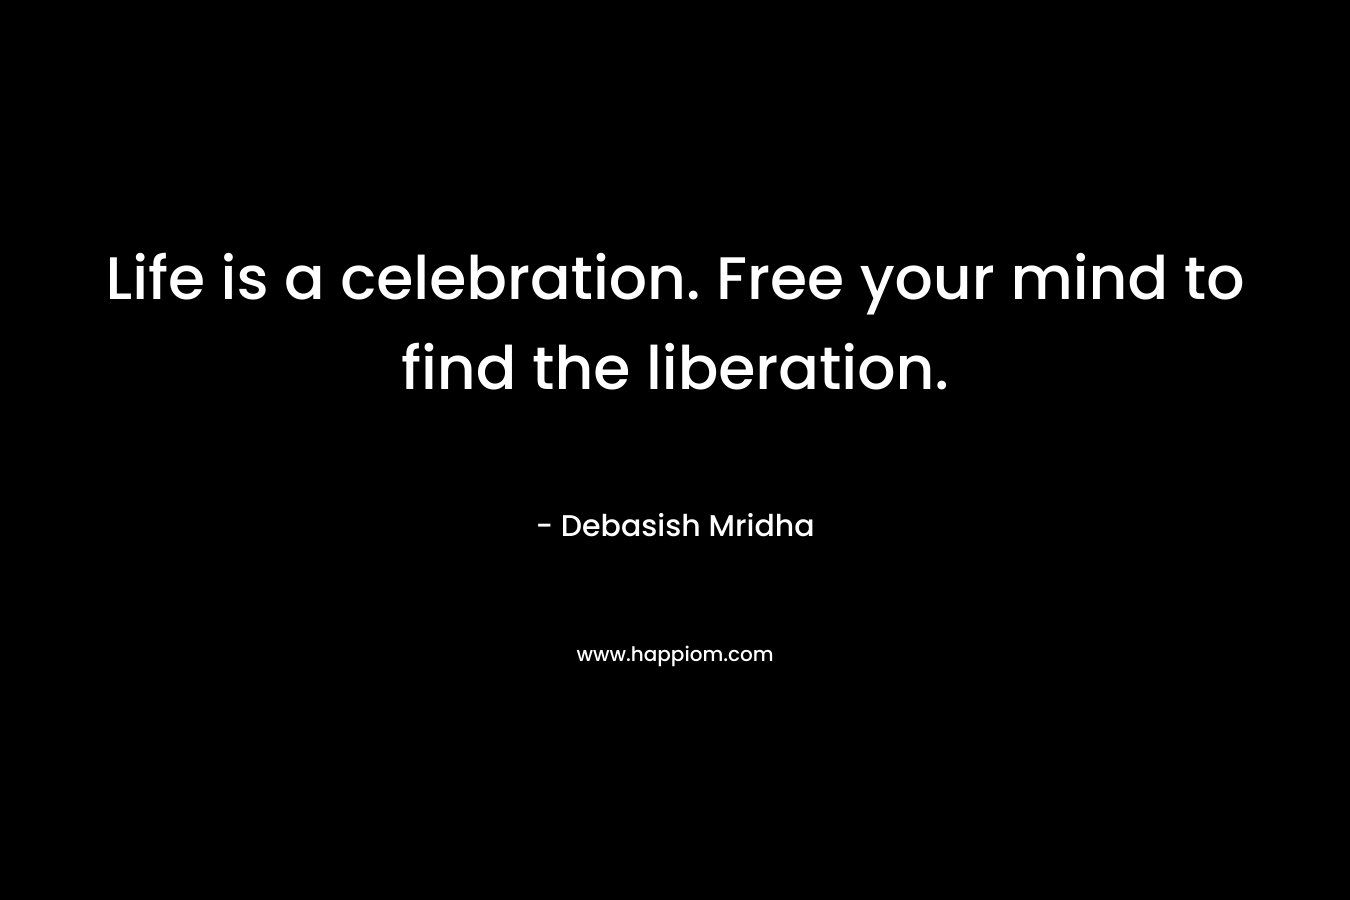 Life is a celebration. Free your mind to find the liberation. – Debasish Mridha